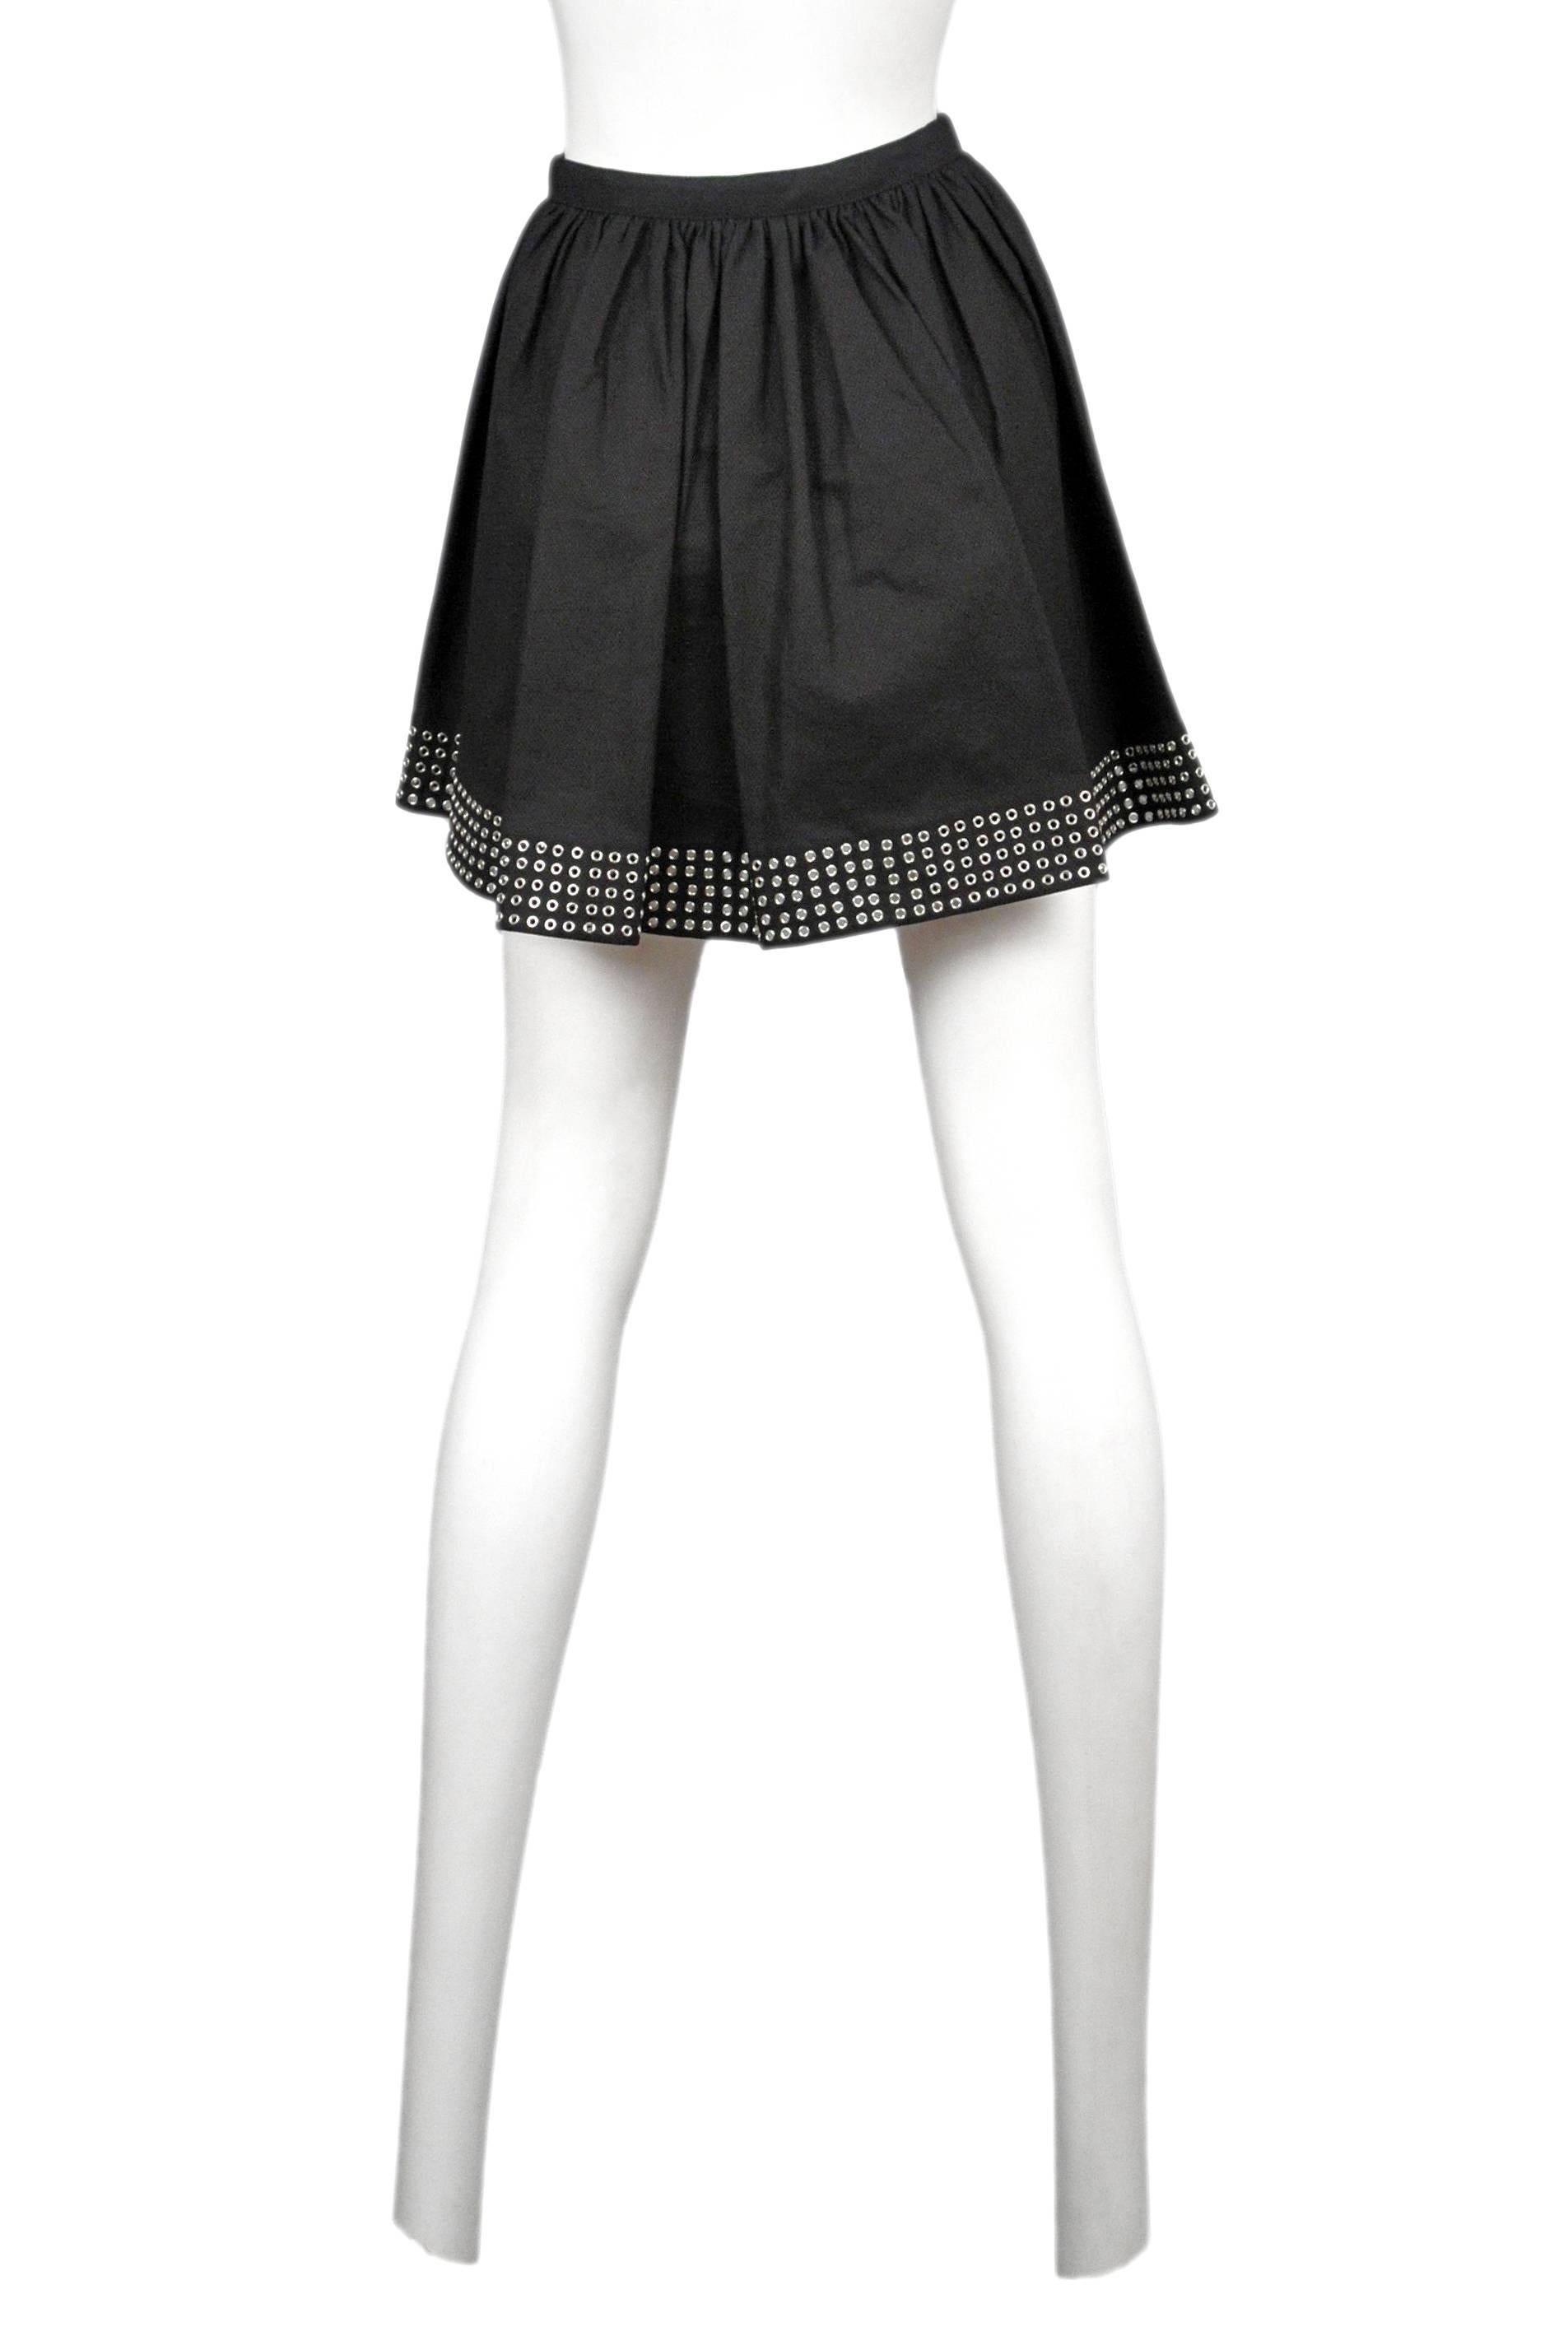 Azzedine Alaia black cotton mini circle skirt with silver grommet trim. Skirt has a one button closure and open front. 